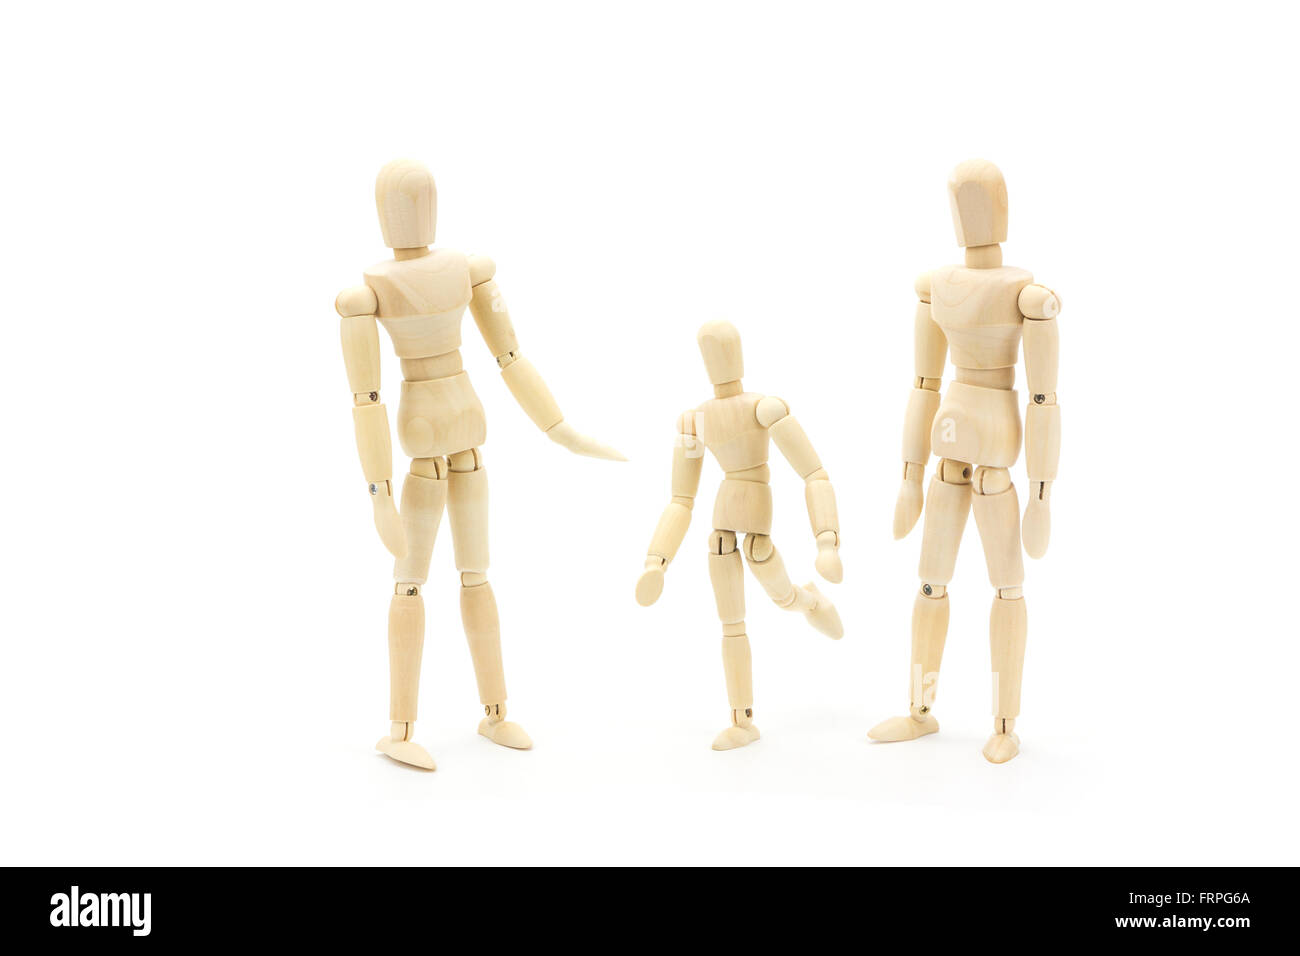 Wooden Manikin Figures Jointed Doll Model.Isolated on white Stock Photo